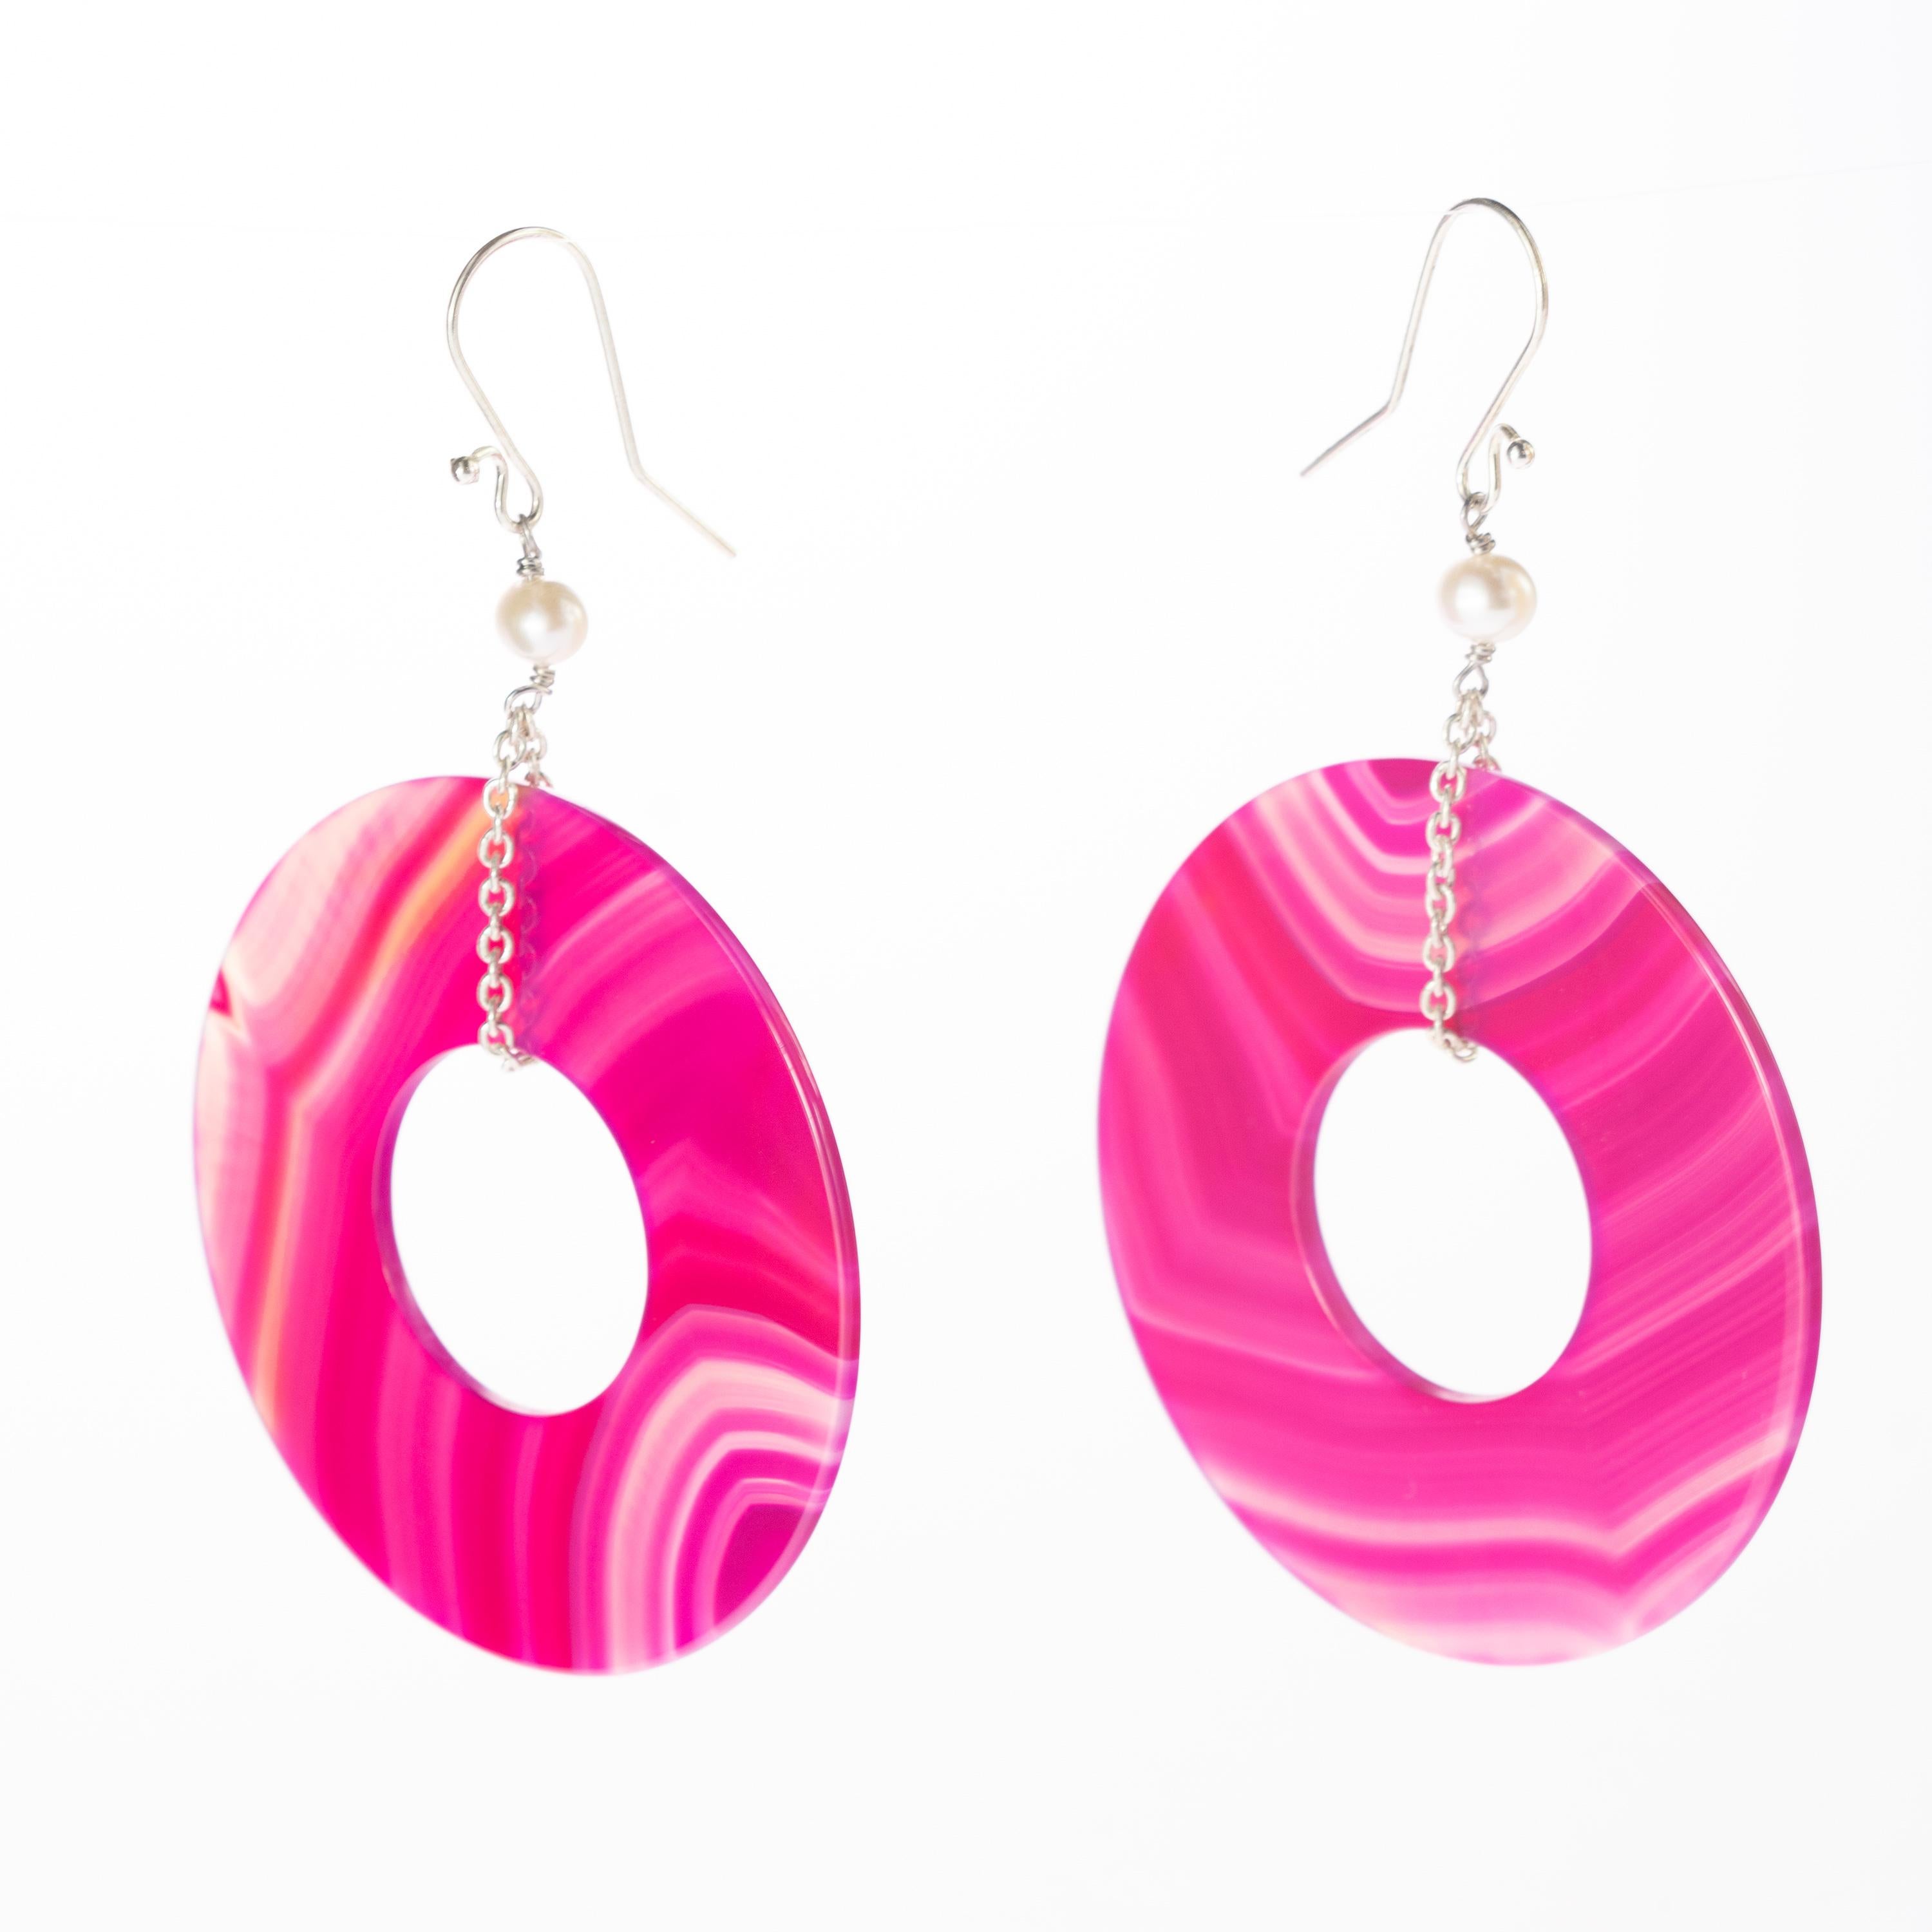 An enchanted round fuchsia agate donut-shaped earrings helded by 925 silver delicate chain with a beautiful pearl. Modern designs full of a vivid color an a voluminous shapes, resulting in bold, free-spirited pieces with a charming elegance.

This